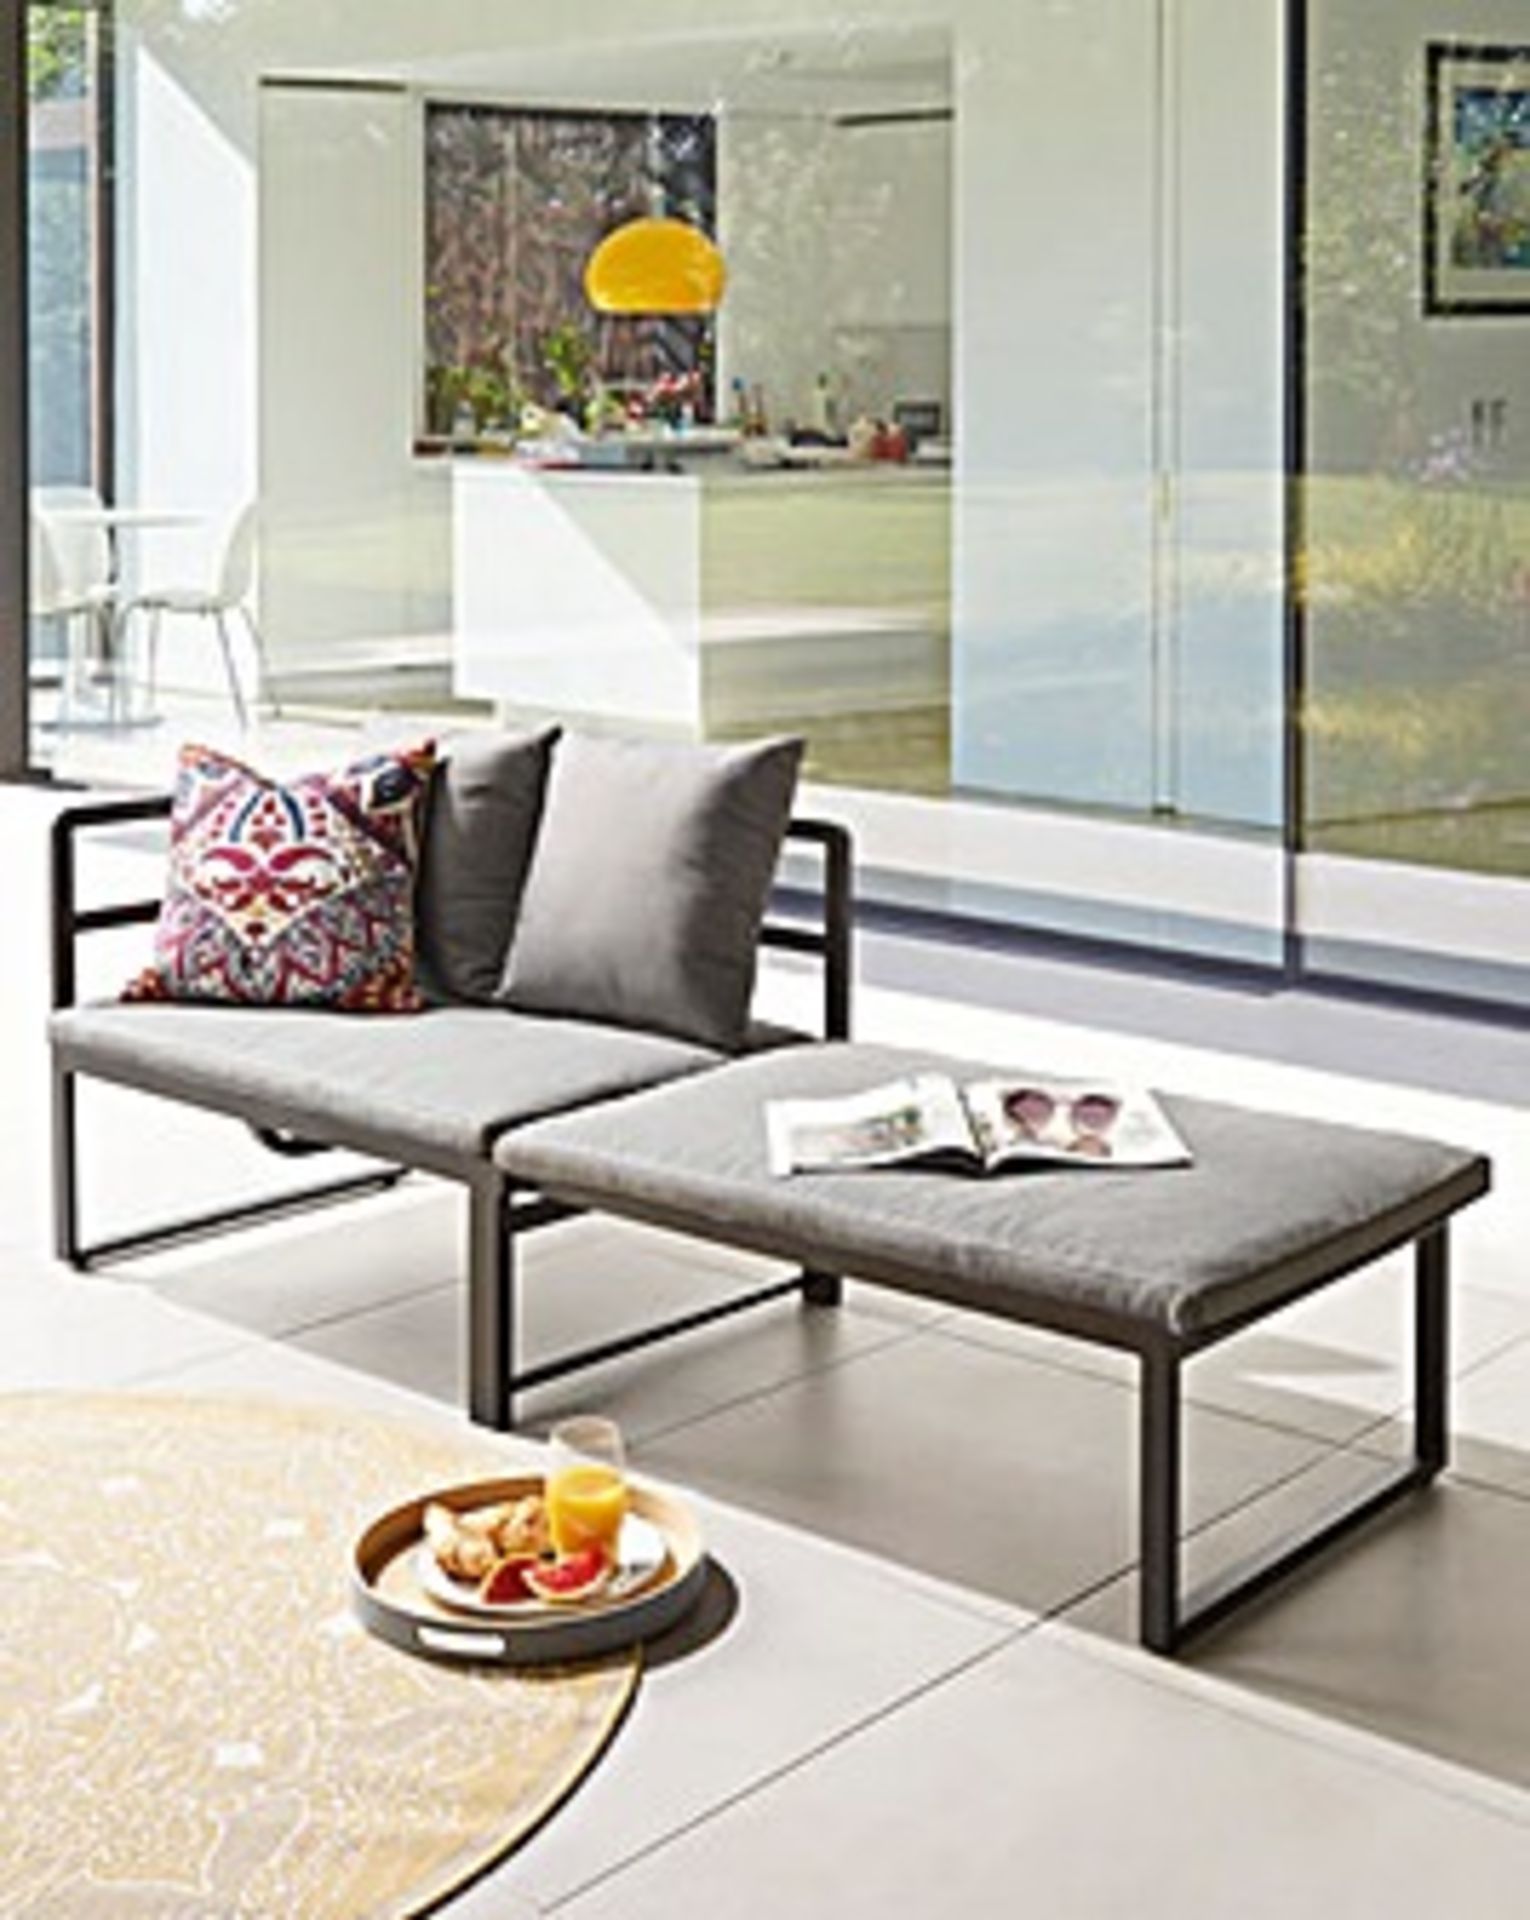 TRADE LOT 4 x BRAND NEW LUXURY EXTENDABLE PATIO BENCH. RRP £225 EACH. This contemporary extendable - Image 2 of 2